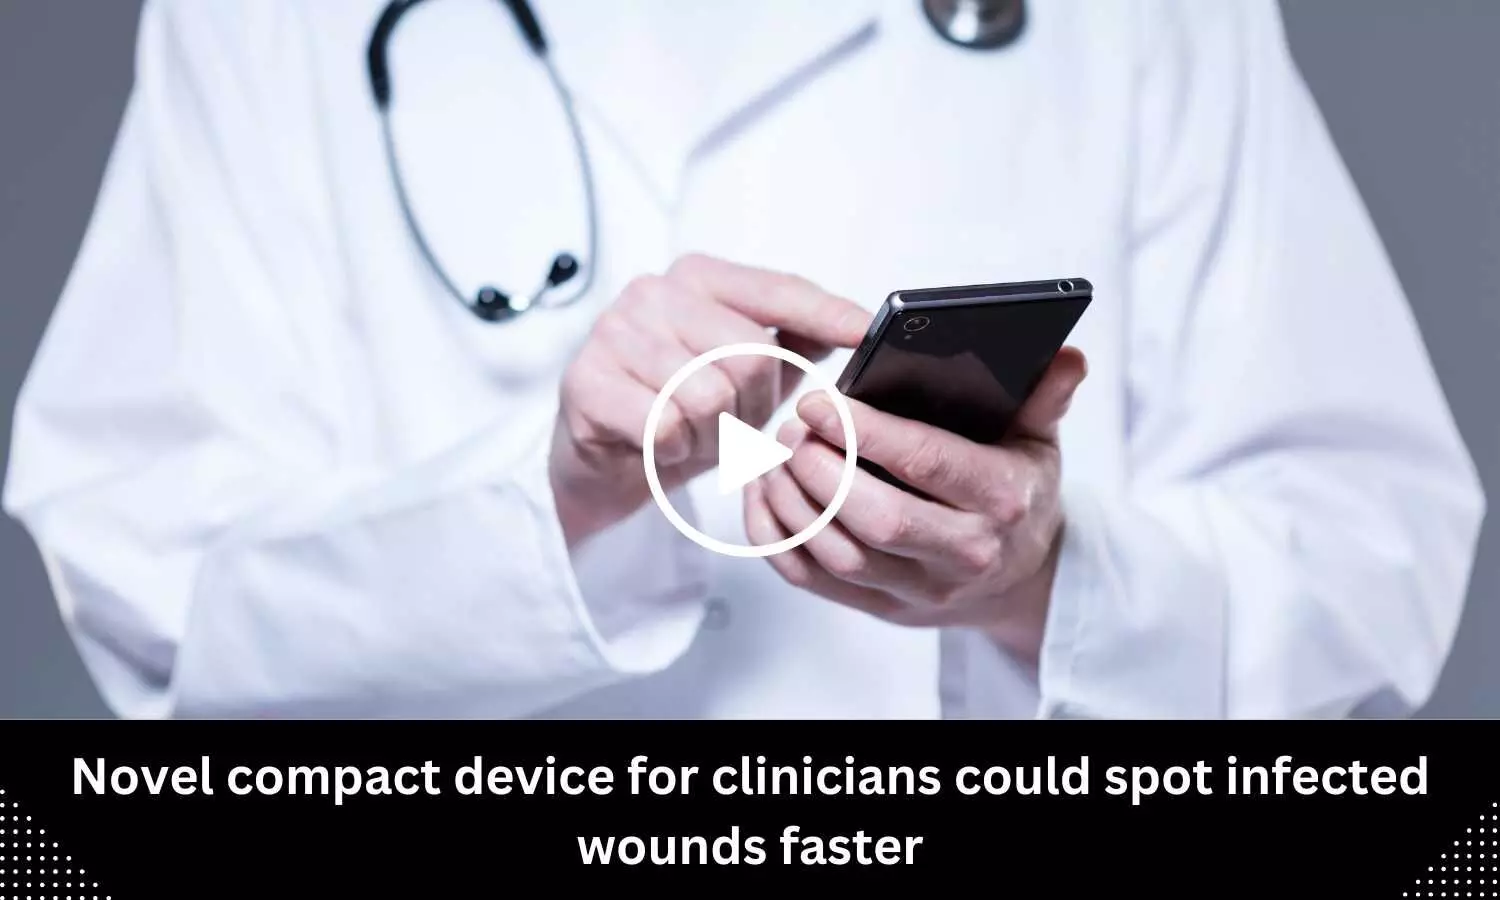 Novel compact device for clinicians could spot infected wounds faster